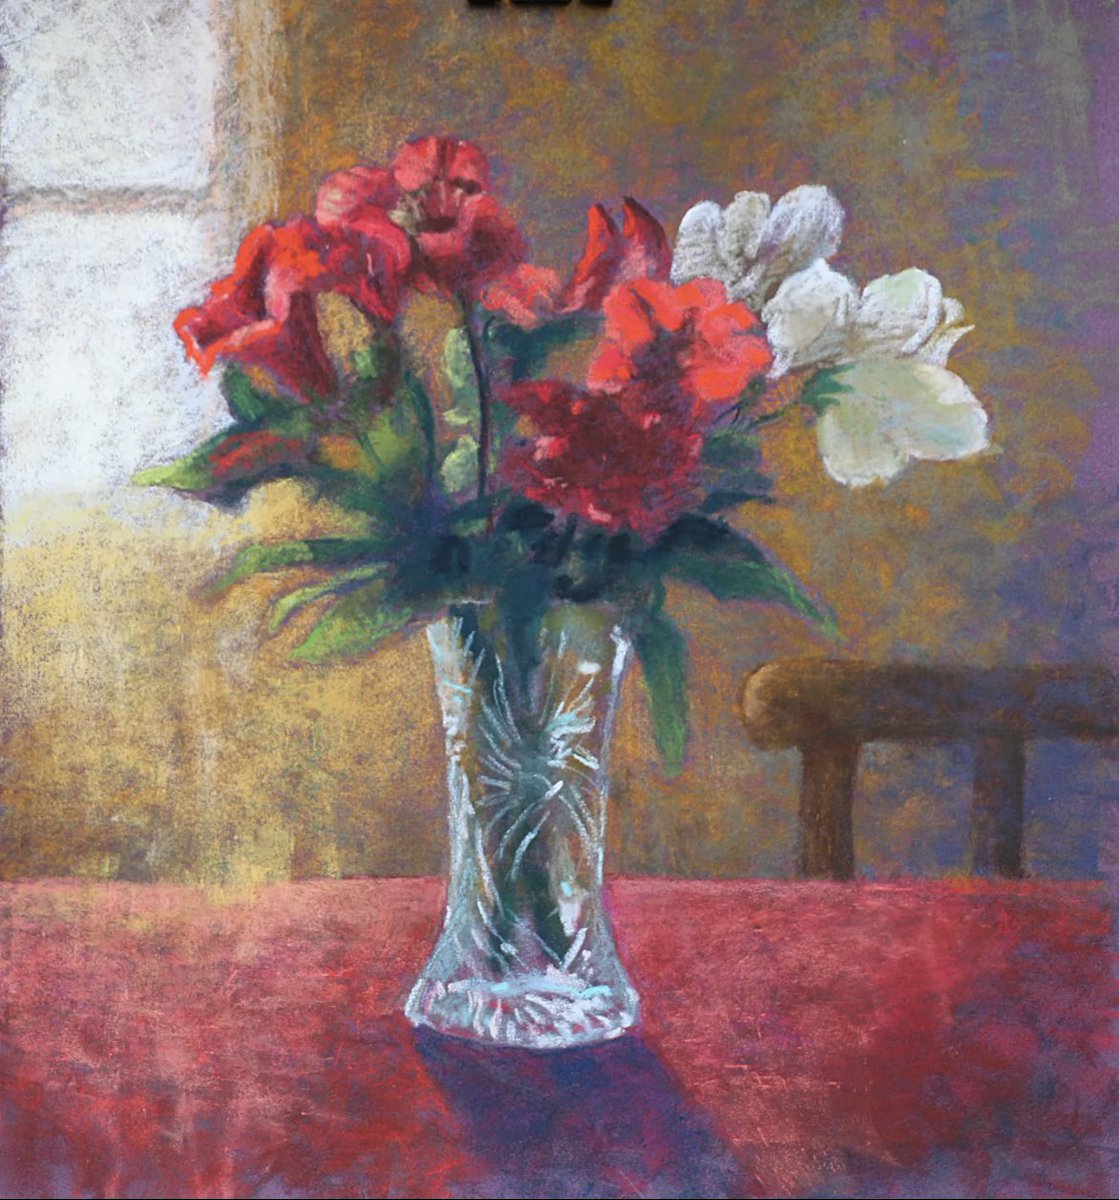 Christine Derrick Red Flowers in Glass Vase Pastel 12” x 13” artwork500.co.uk/product/red-fl… 📩 PM For Further Enquiries 🚚 Free Postage Throughout the UK 📲 Klarna, Clearpay Options Available #visitcotswolds #wiltshirephotographer #interiordesign #countrysidephotography